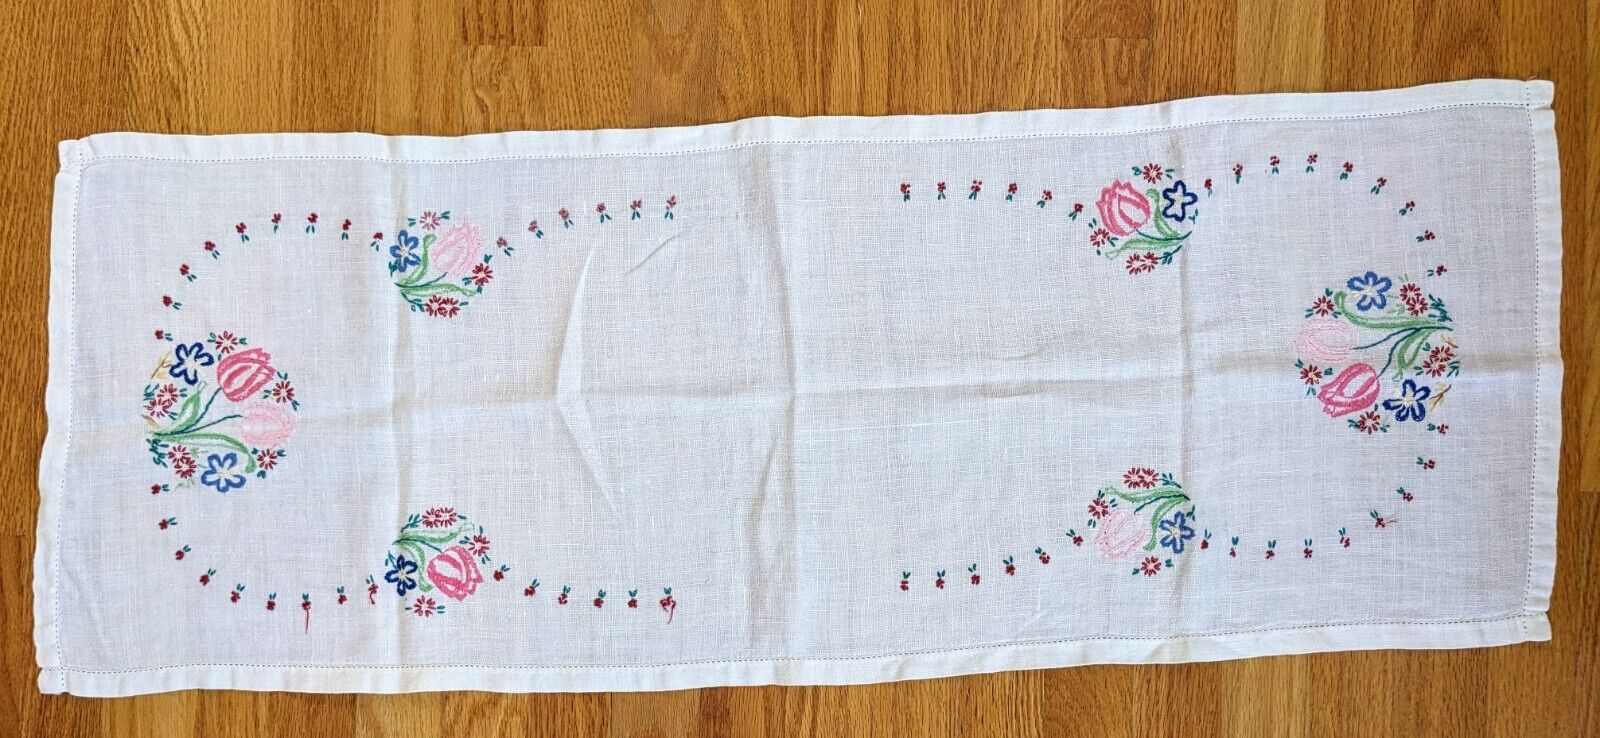 VTG Table Runner White Linen Floral Embroidery Pink Tulips 39x15\